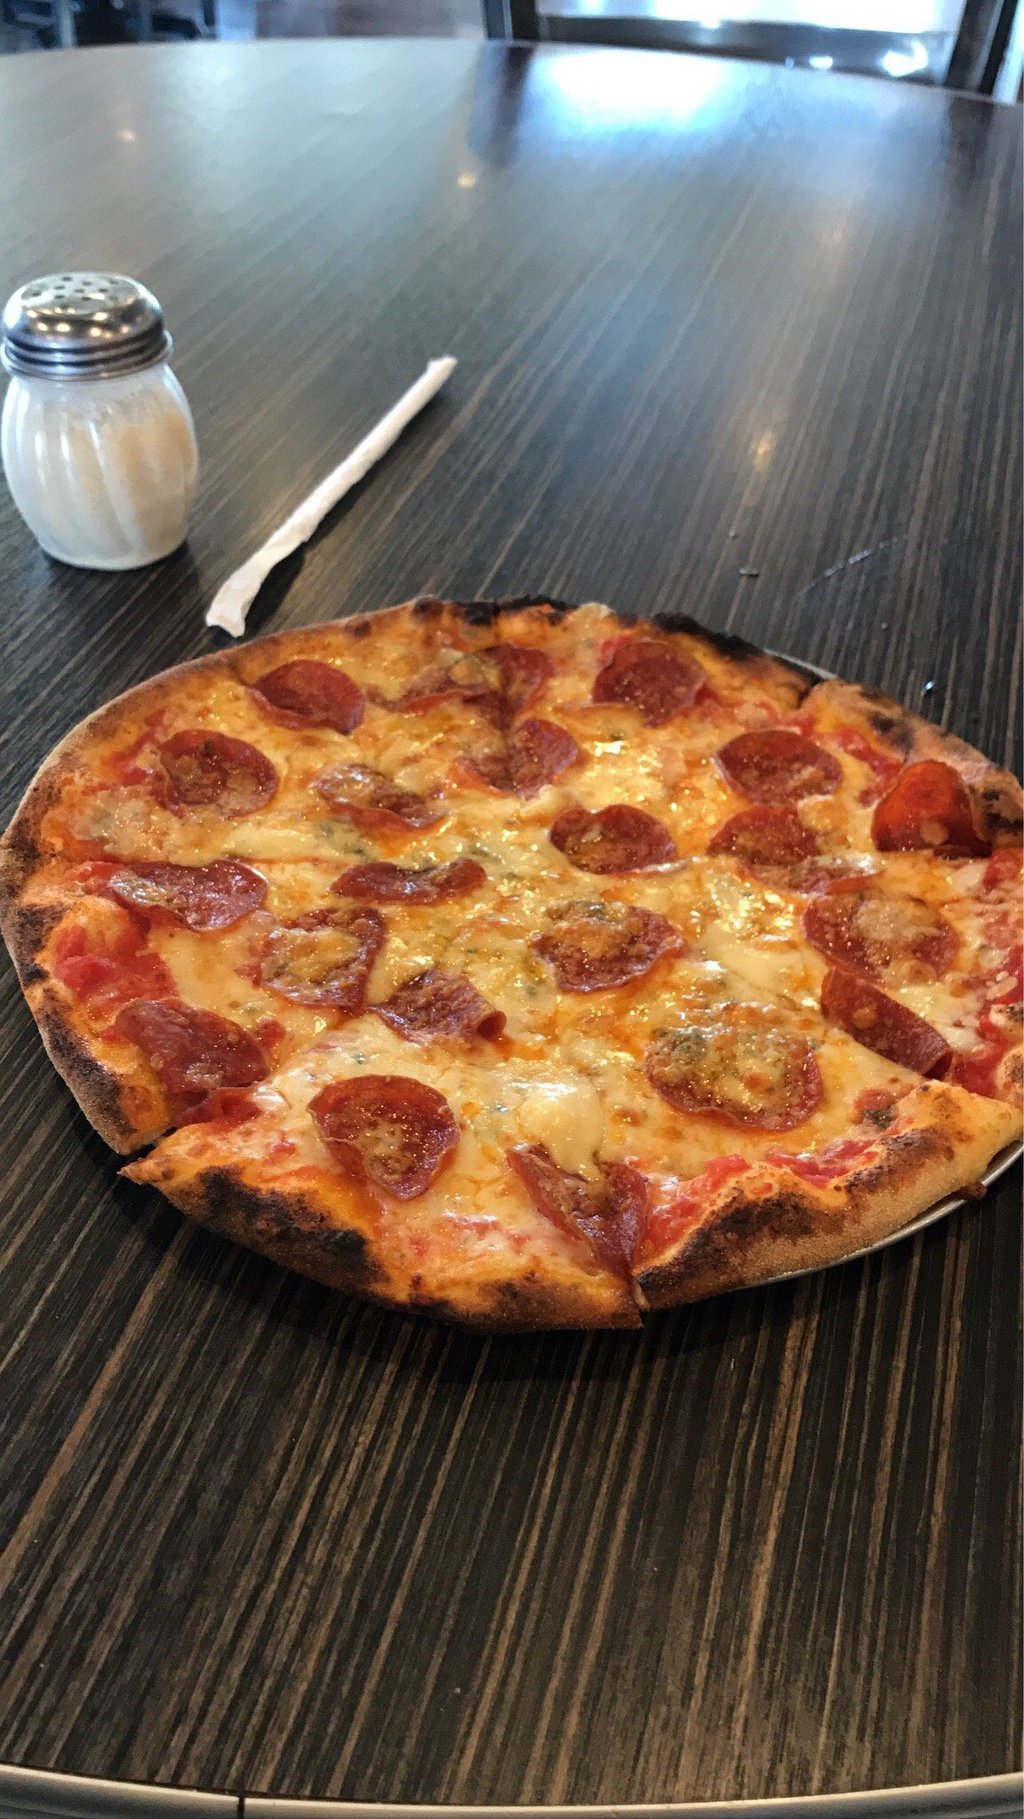 Pizzelii Brick Oven Pizza